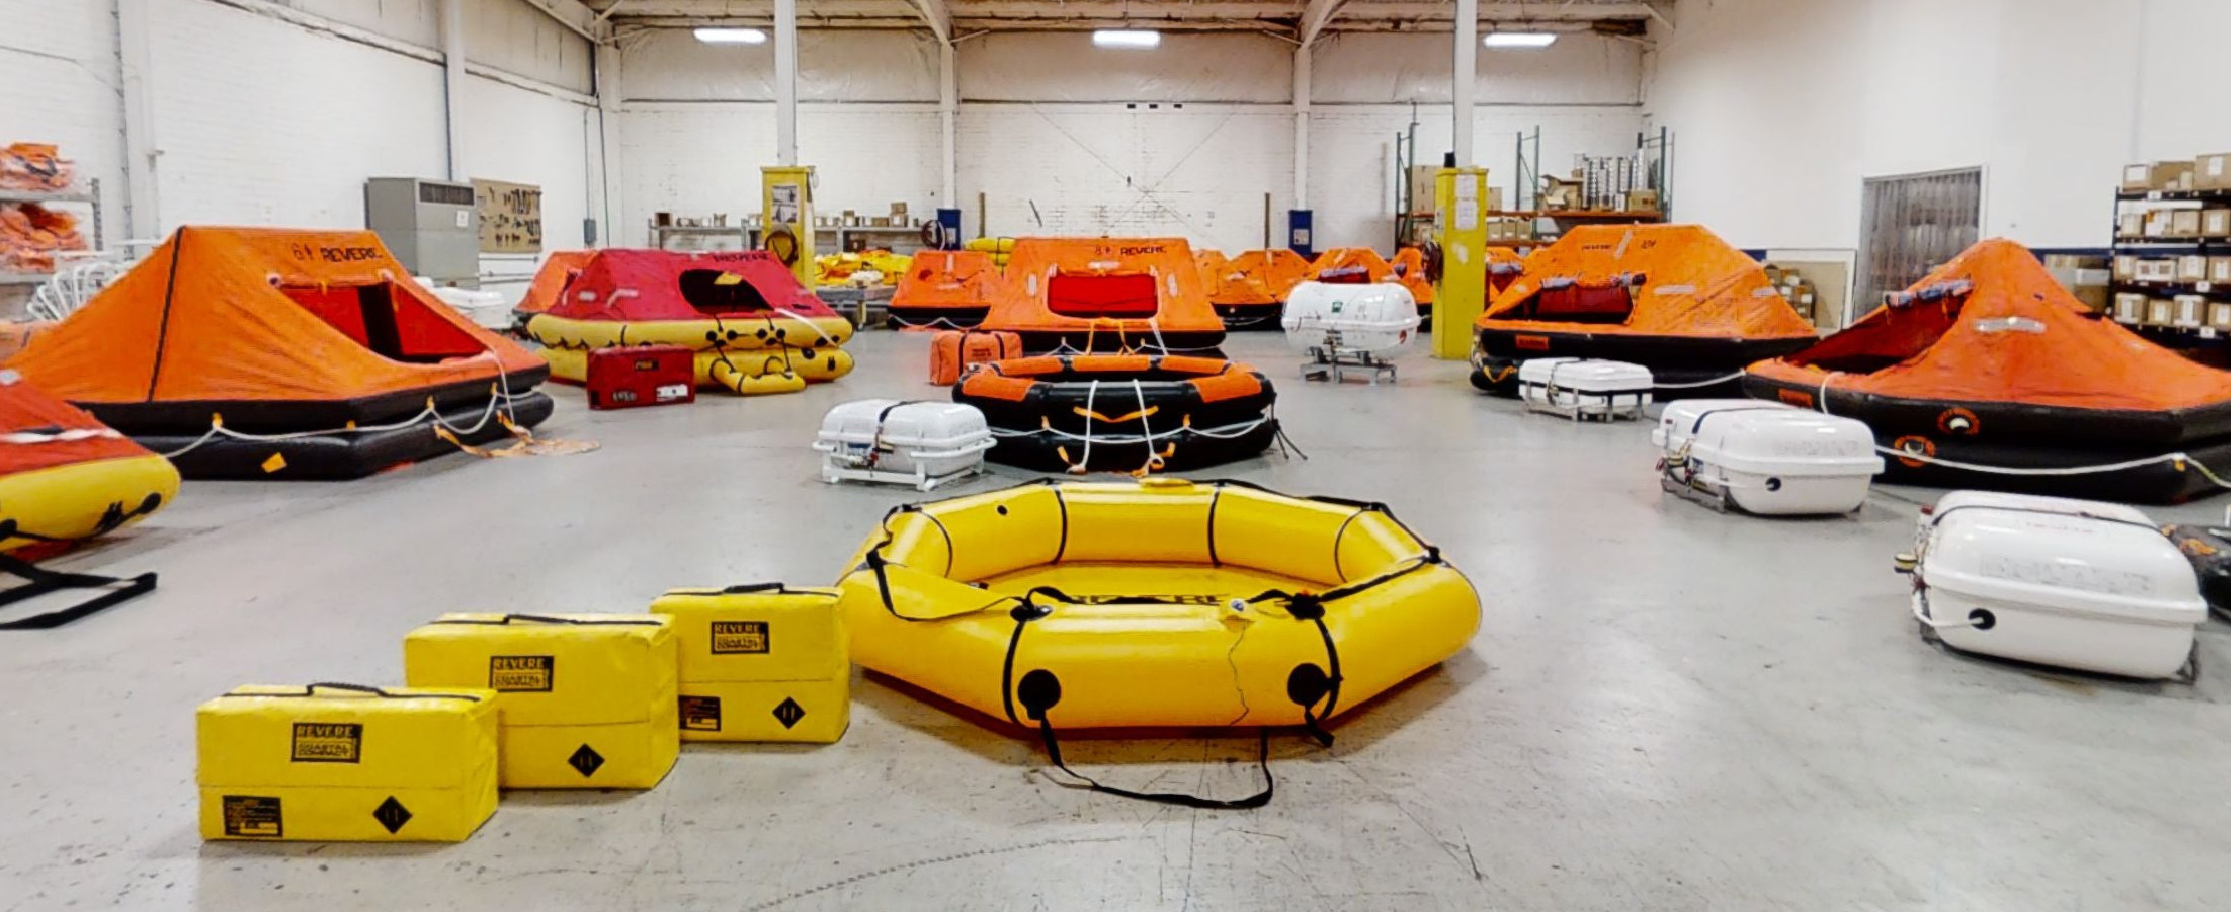 LALIZAS, which provides marine safety equipment, has acquired Revere Survival, a US-based manufacturer and distributor of liferafts and other survival equipment for the recreational and commercial markets in a move towards continued growth and expansion in North America.